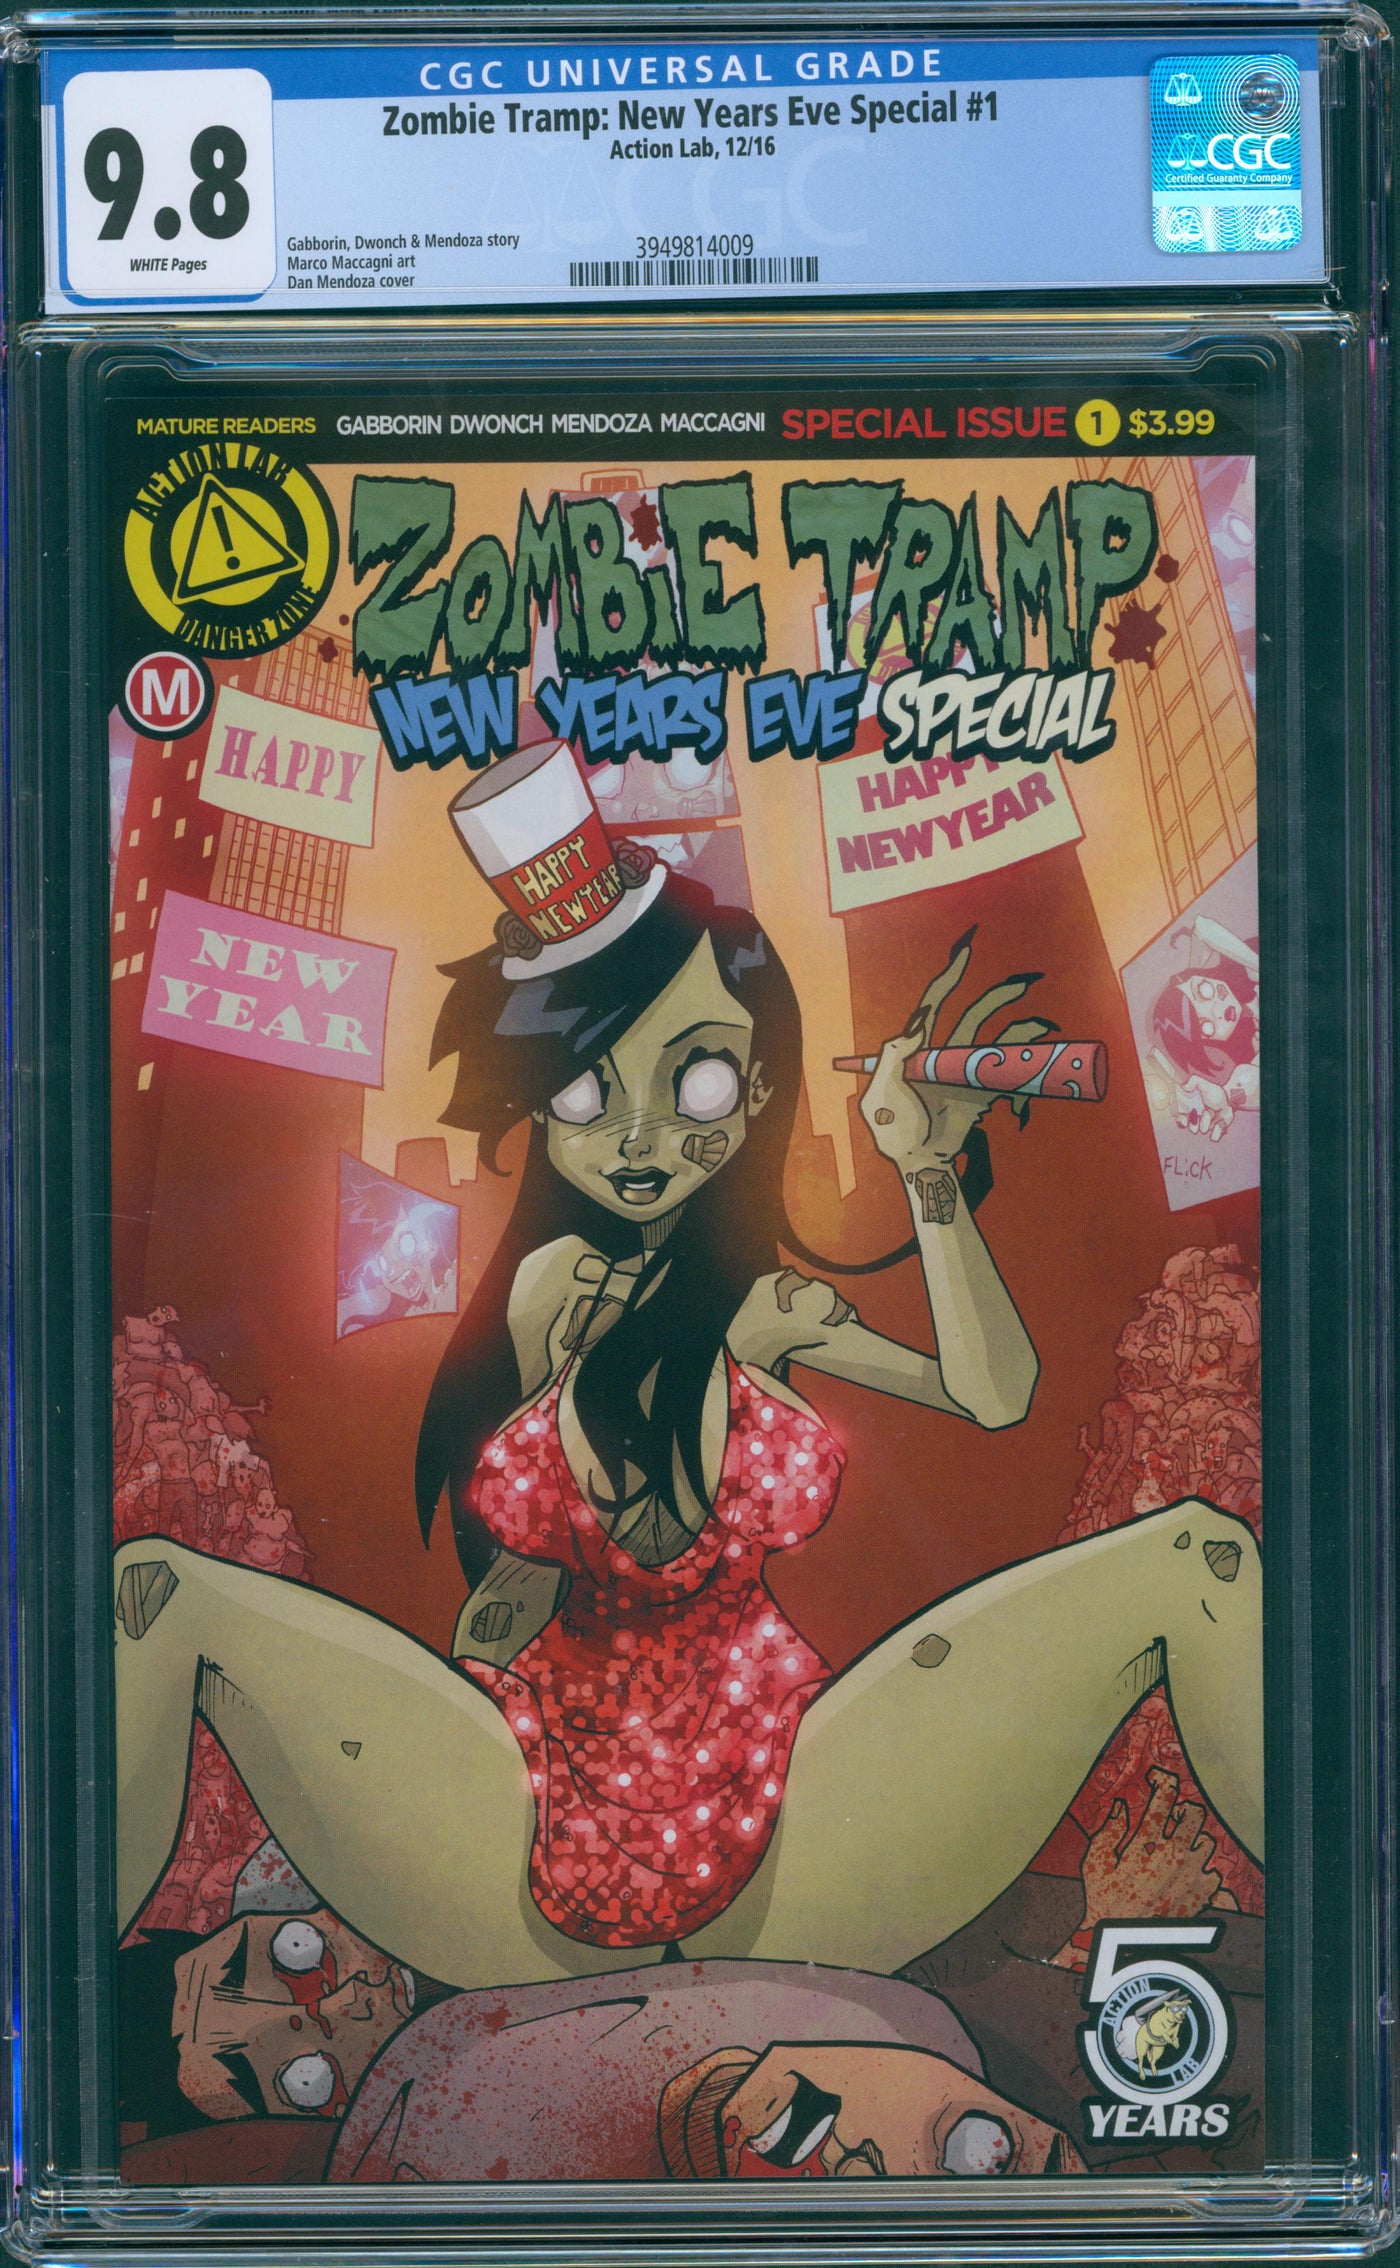 Zombie Tramp New years eve special #1 CGC 9.8